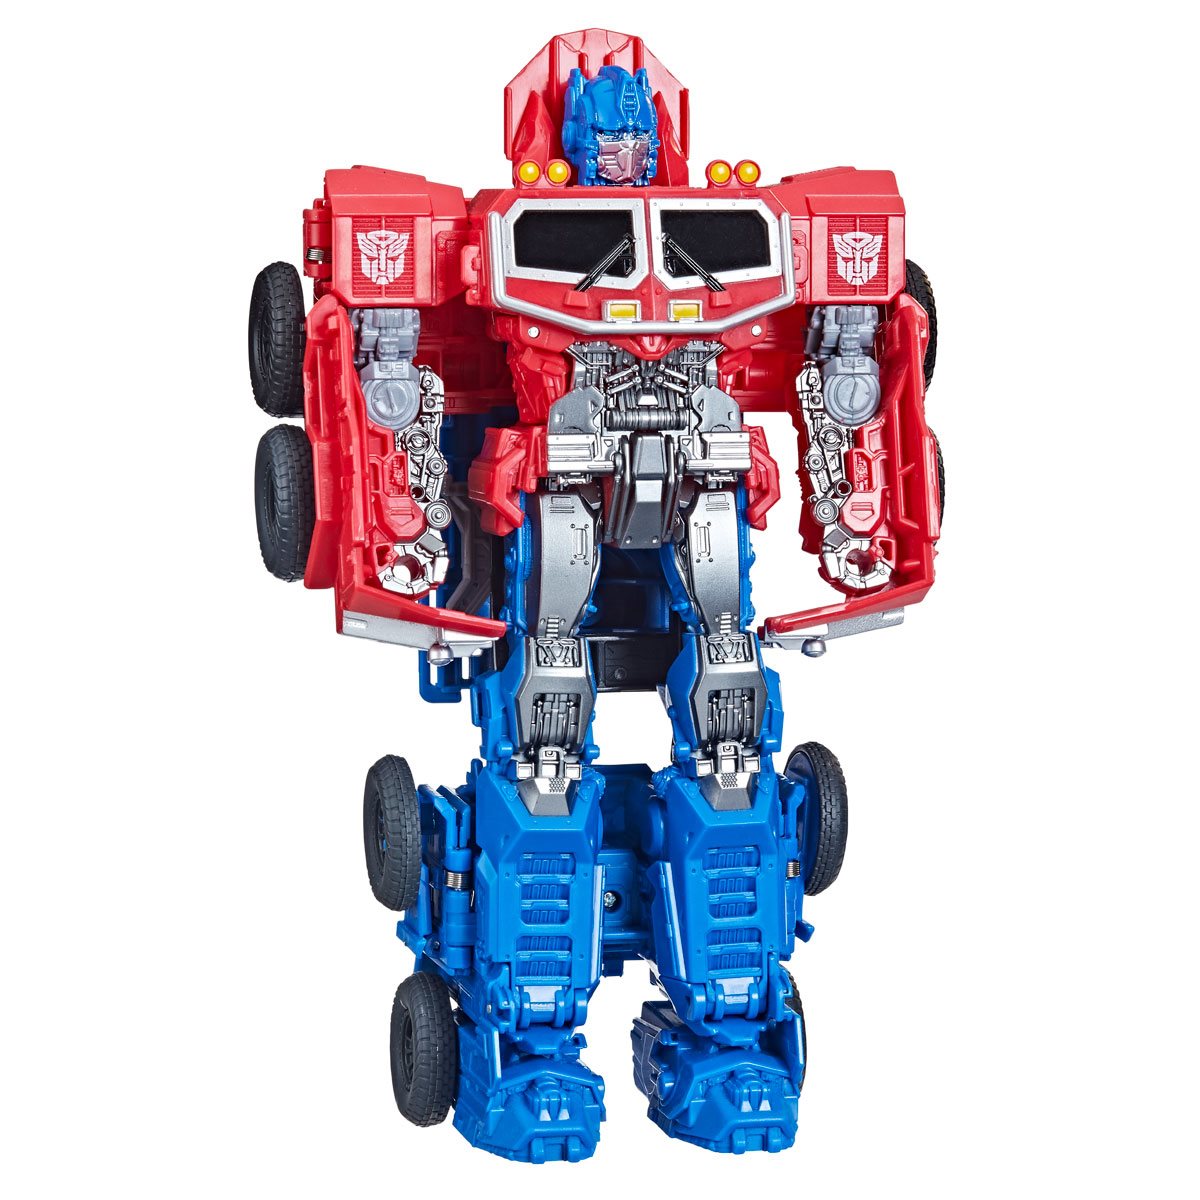 Transformers Rise of The Beasts - Smash Changer Optimus Prime Action Figure Toy Robot mode